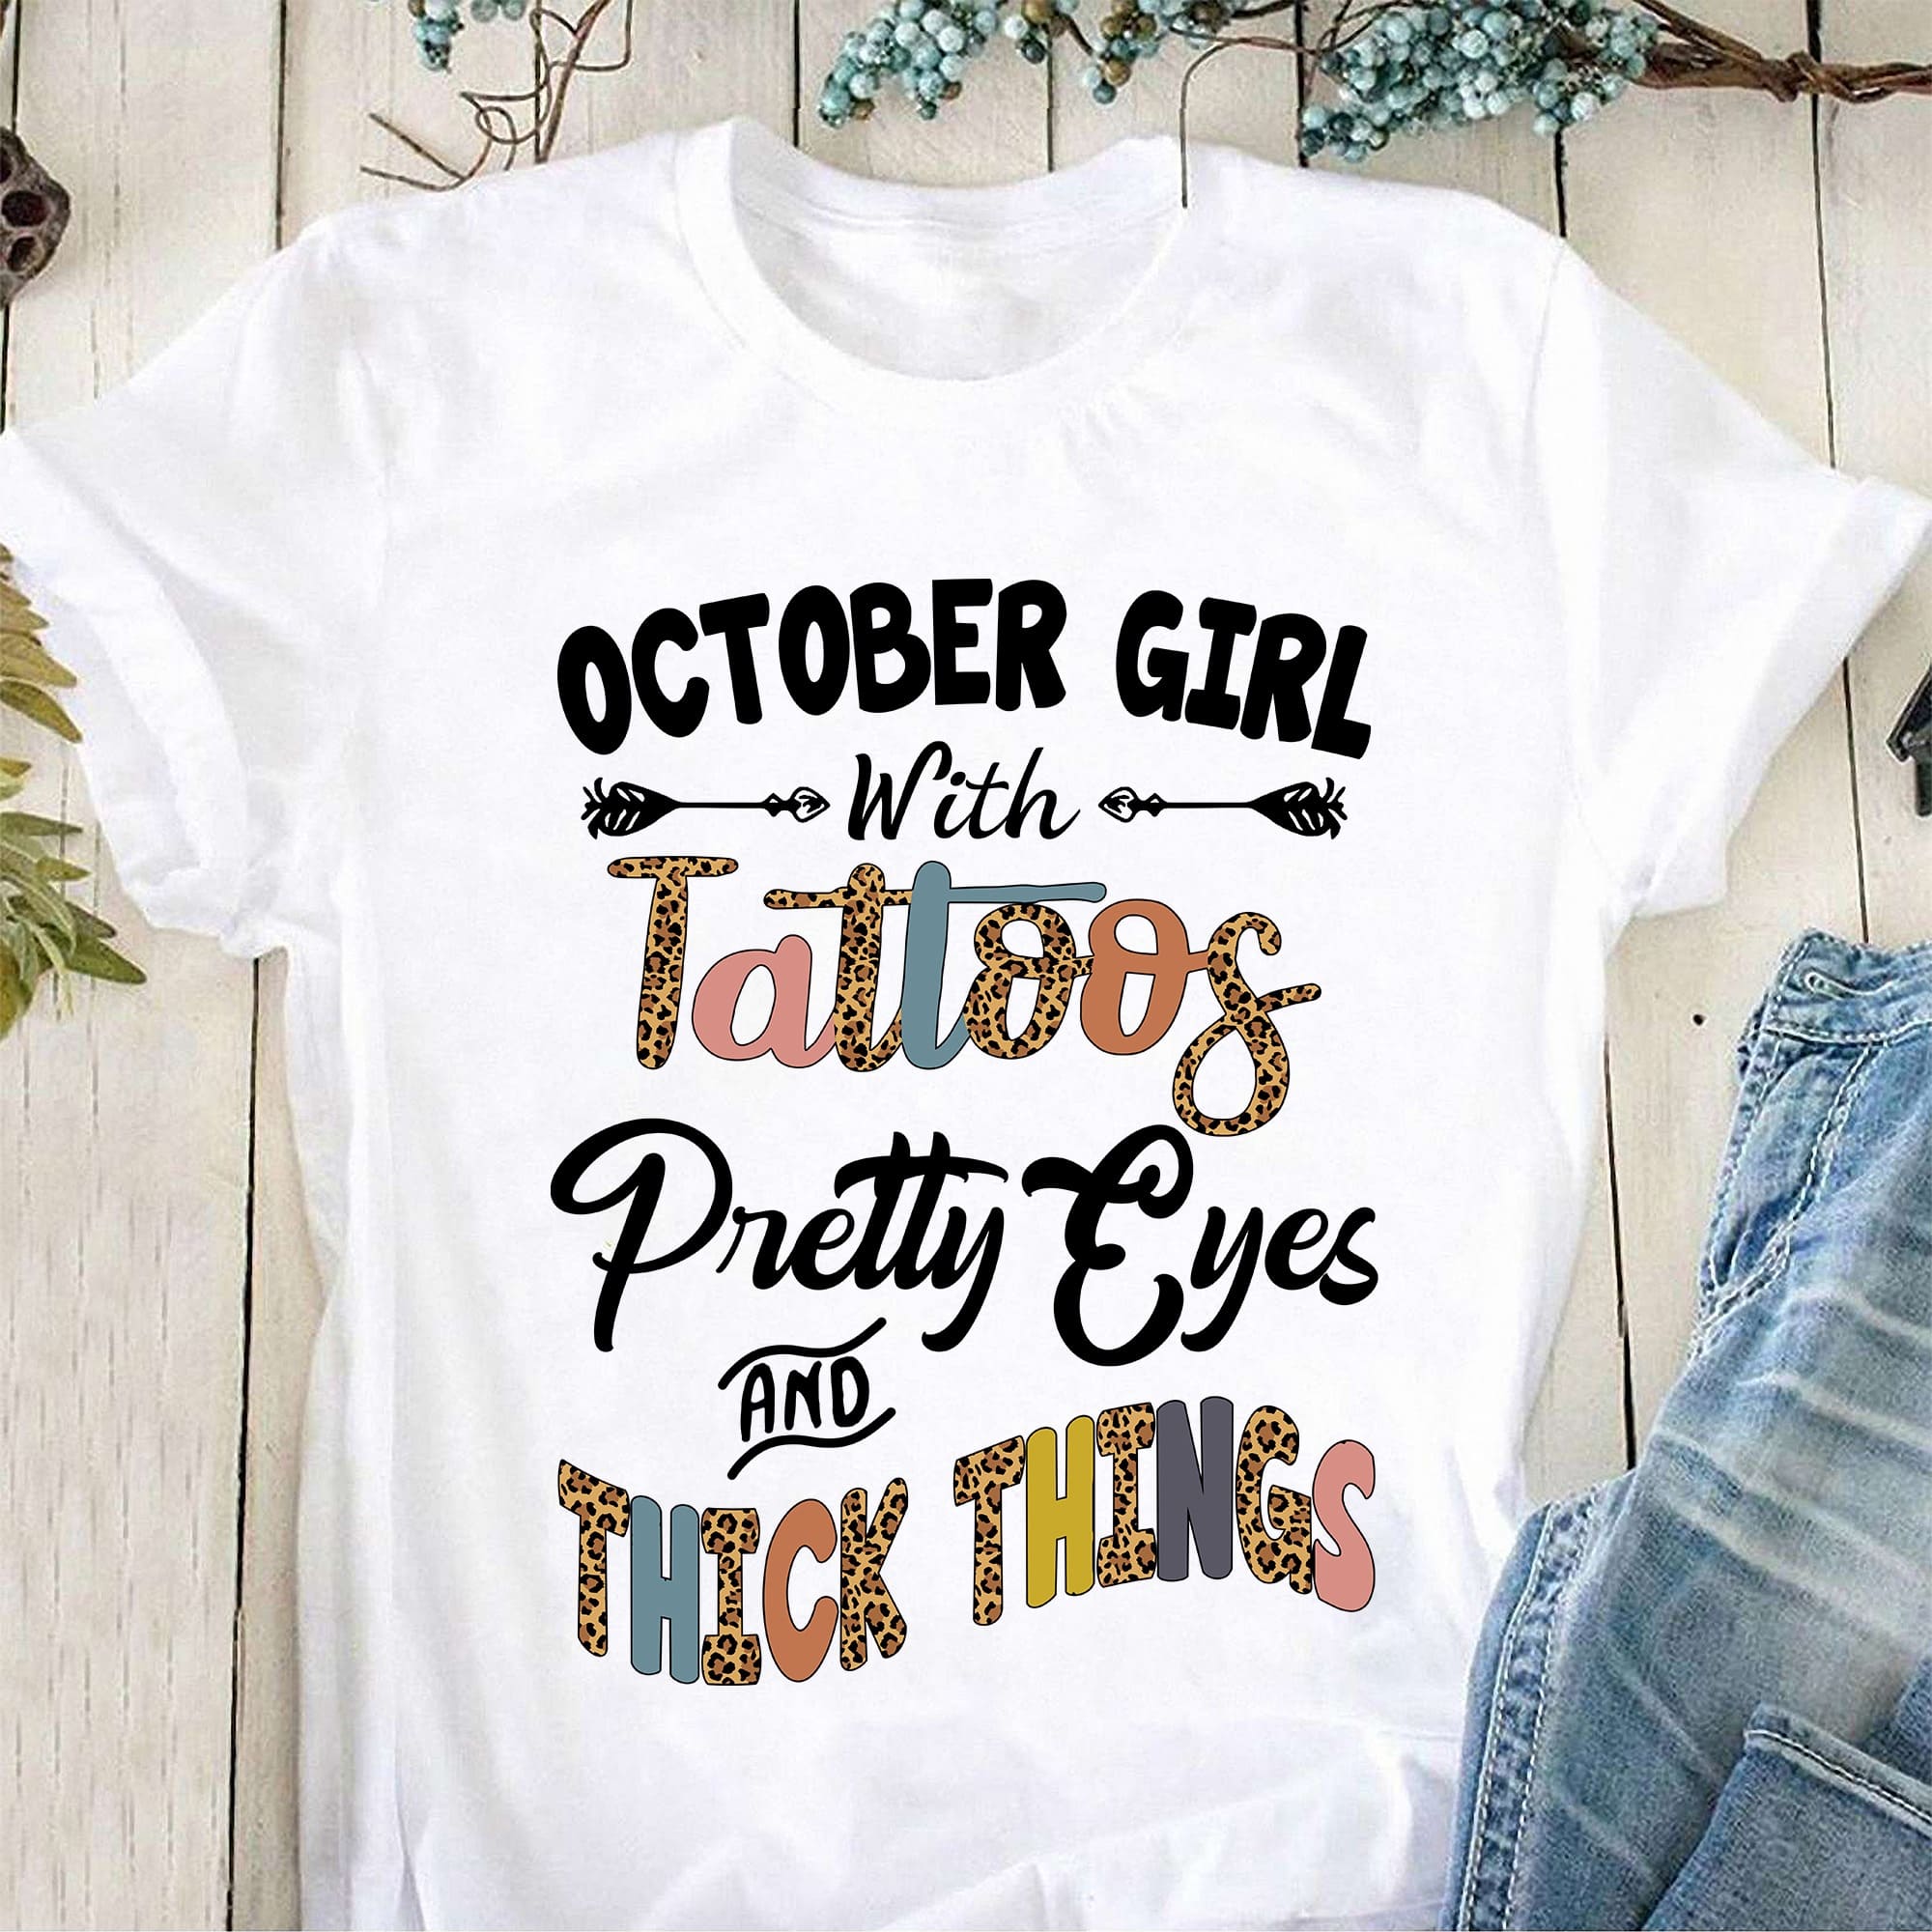 October girl with tattoos, pretty eyes and thick thighs